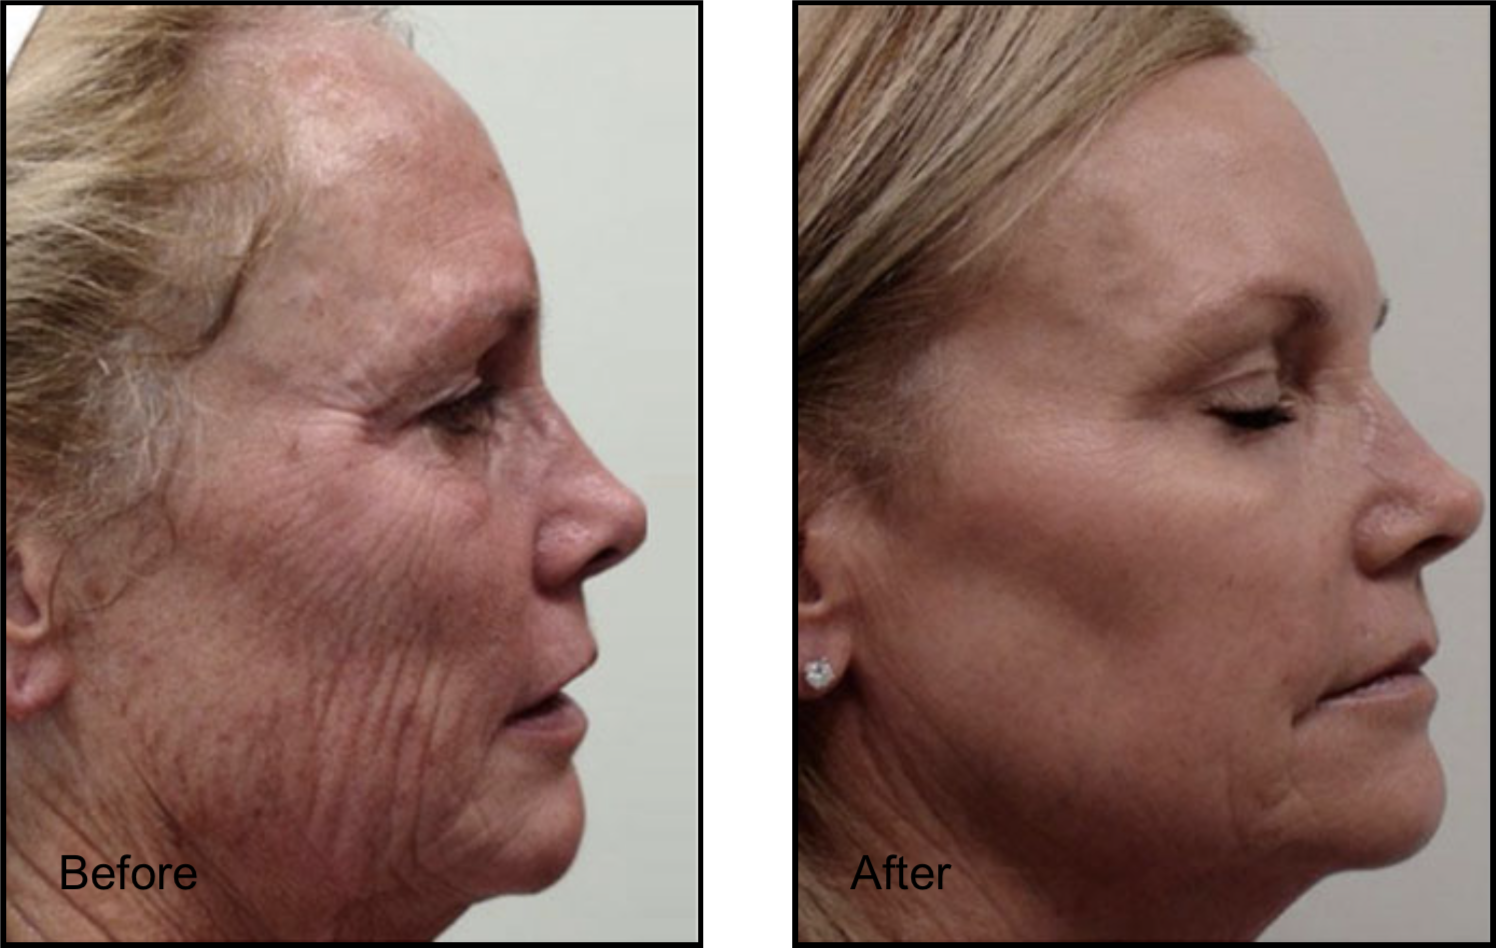 Female patient's face before and after CO2 laser skin resurfacing